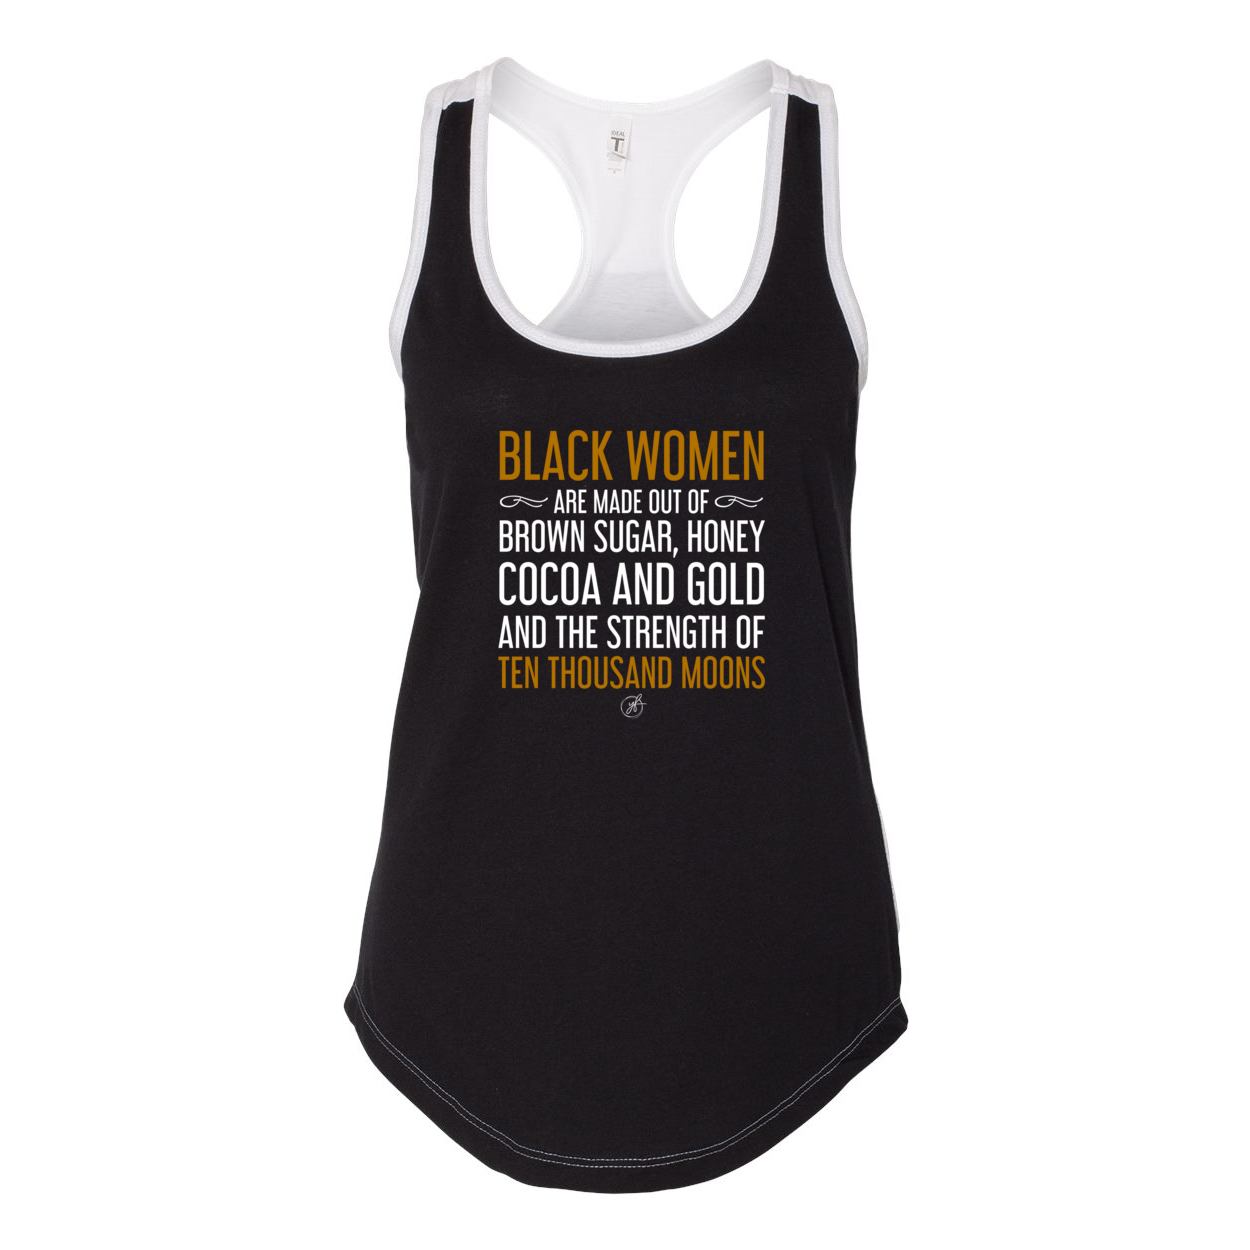 YOLO FITTED'S, "BLACK WOMEN ARE MADE OF...." RACER BACK TANK